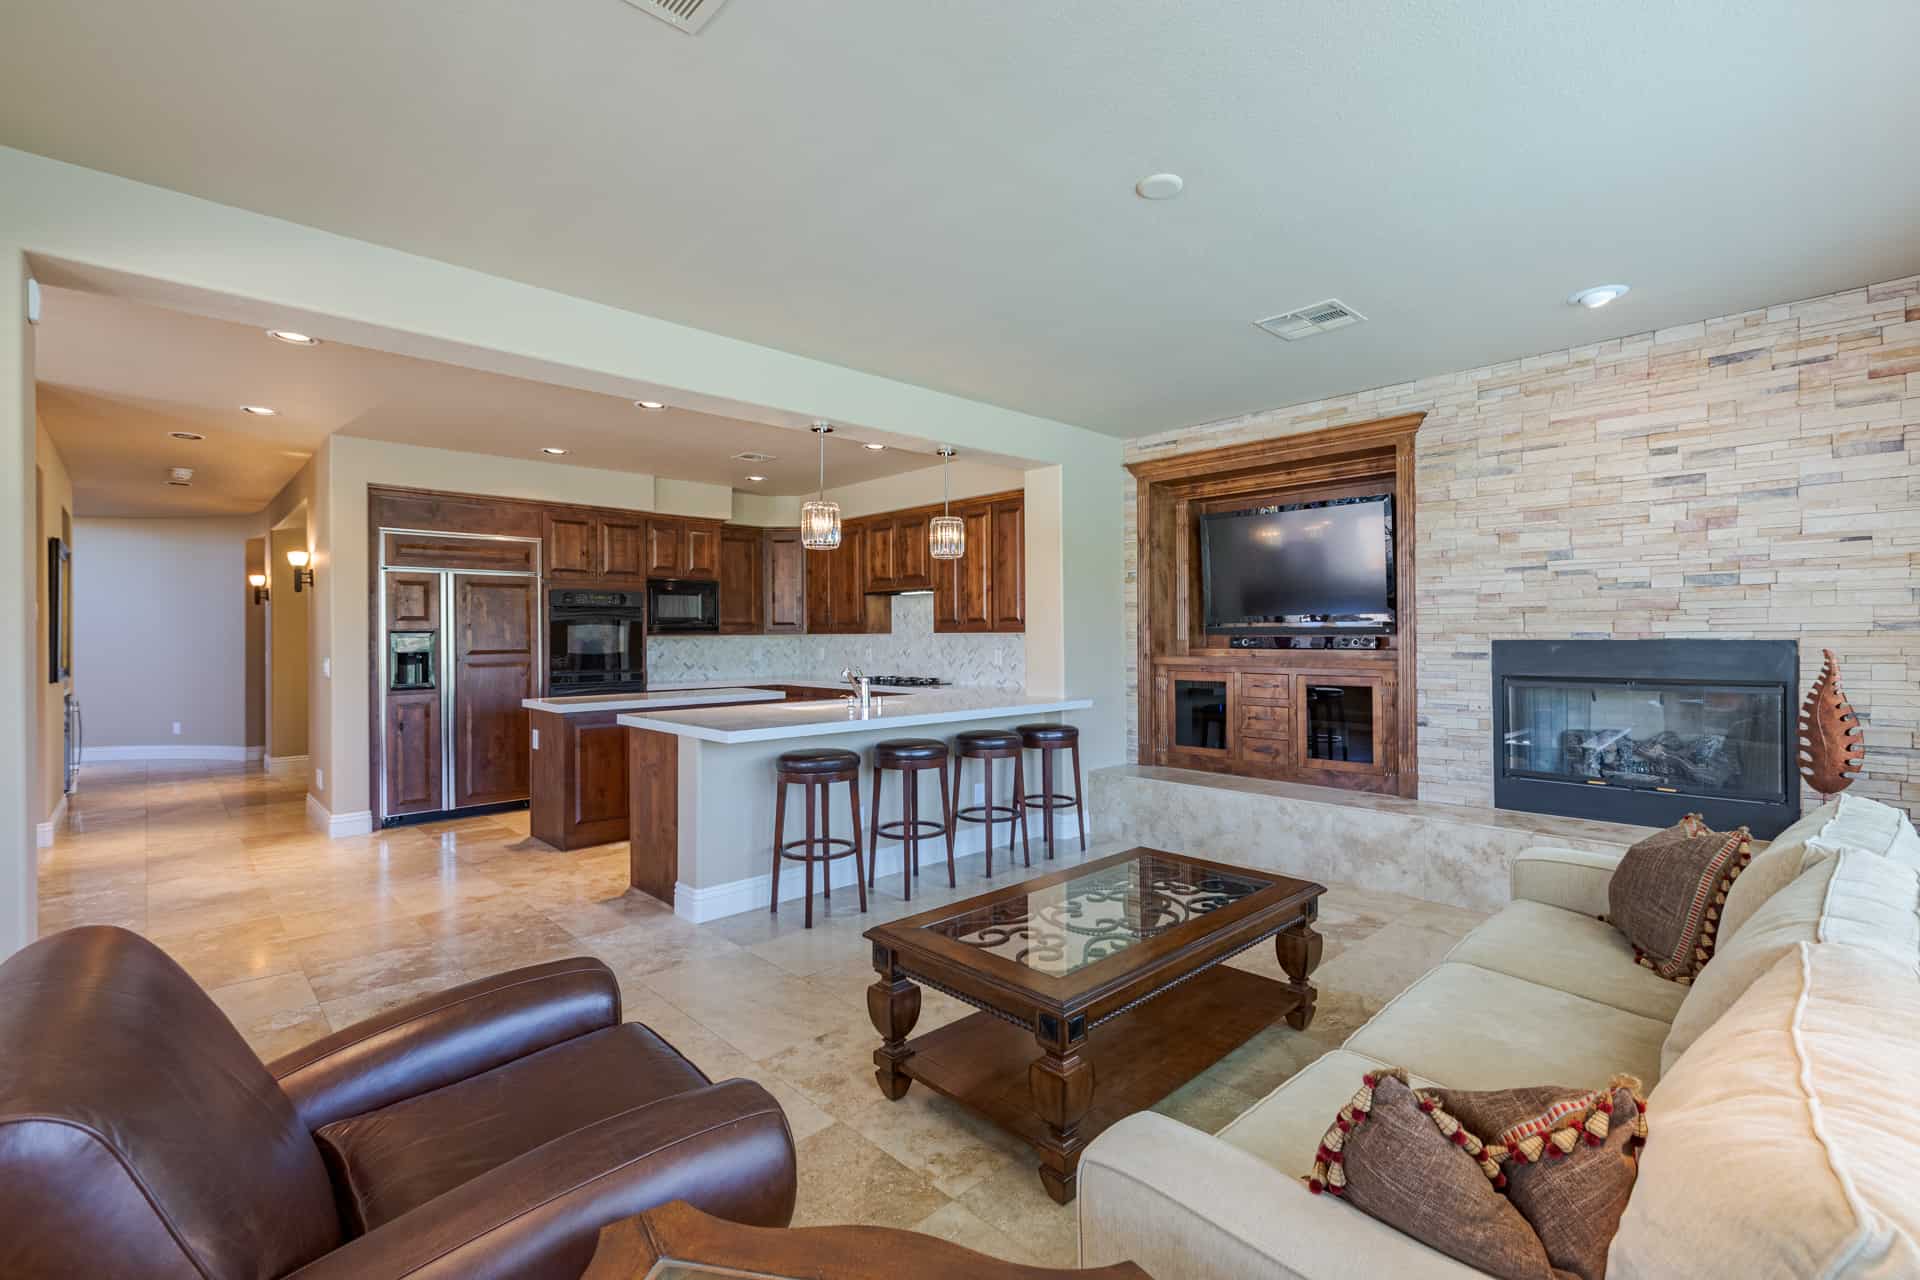 las-vegas-luxry-real-estate-realtor-rob-jensen-company-11434-glowing-sunset-lane-red-rock-country-club37